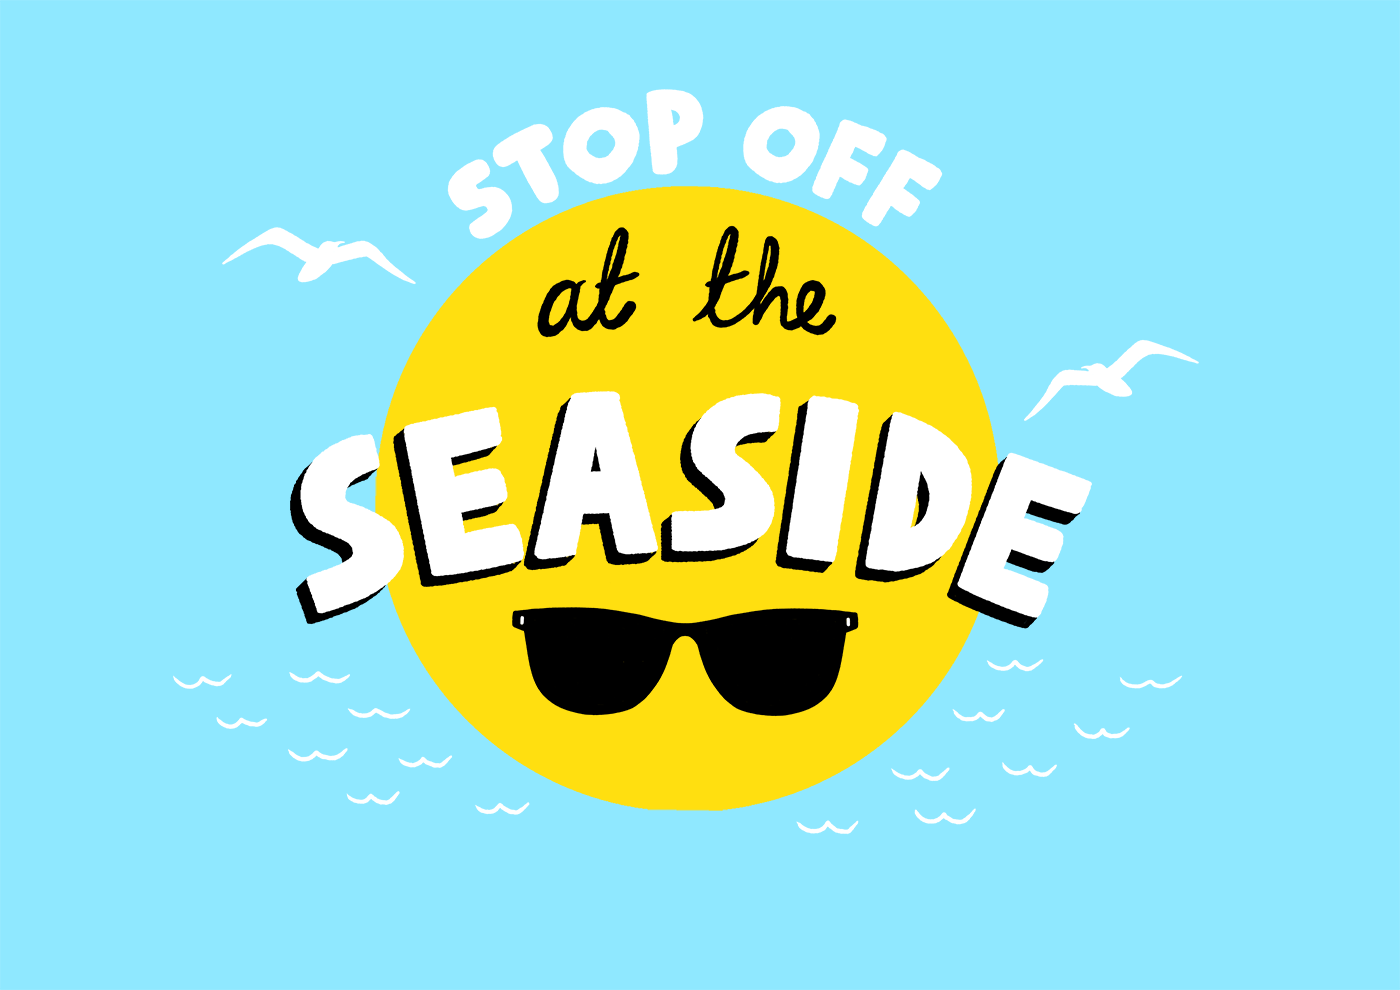 Stop off at the seaside